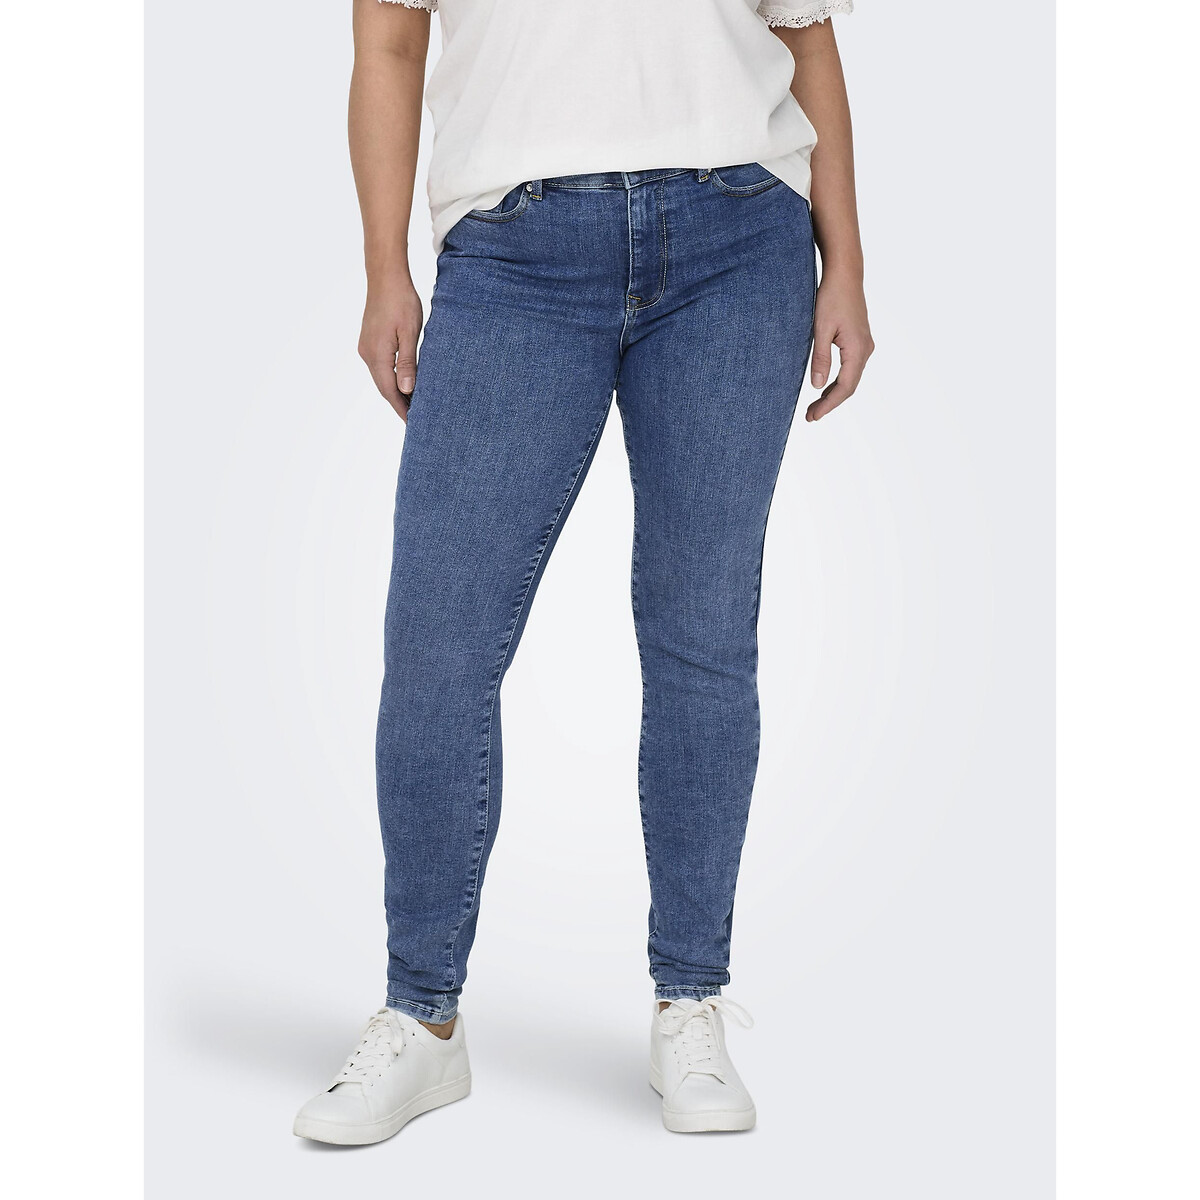 ONLY CARMAKOMA Jeans Skinny Pushup, standaard taille